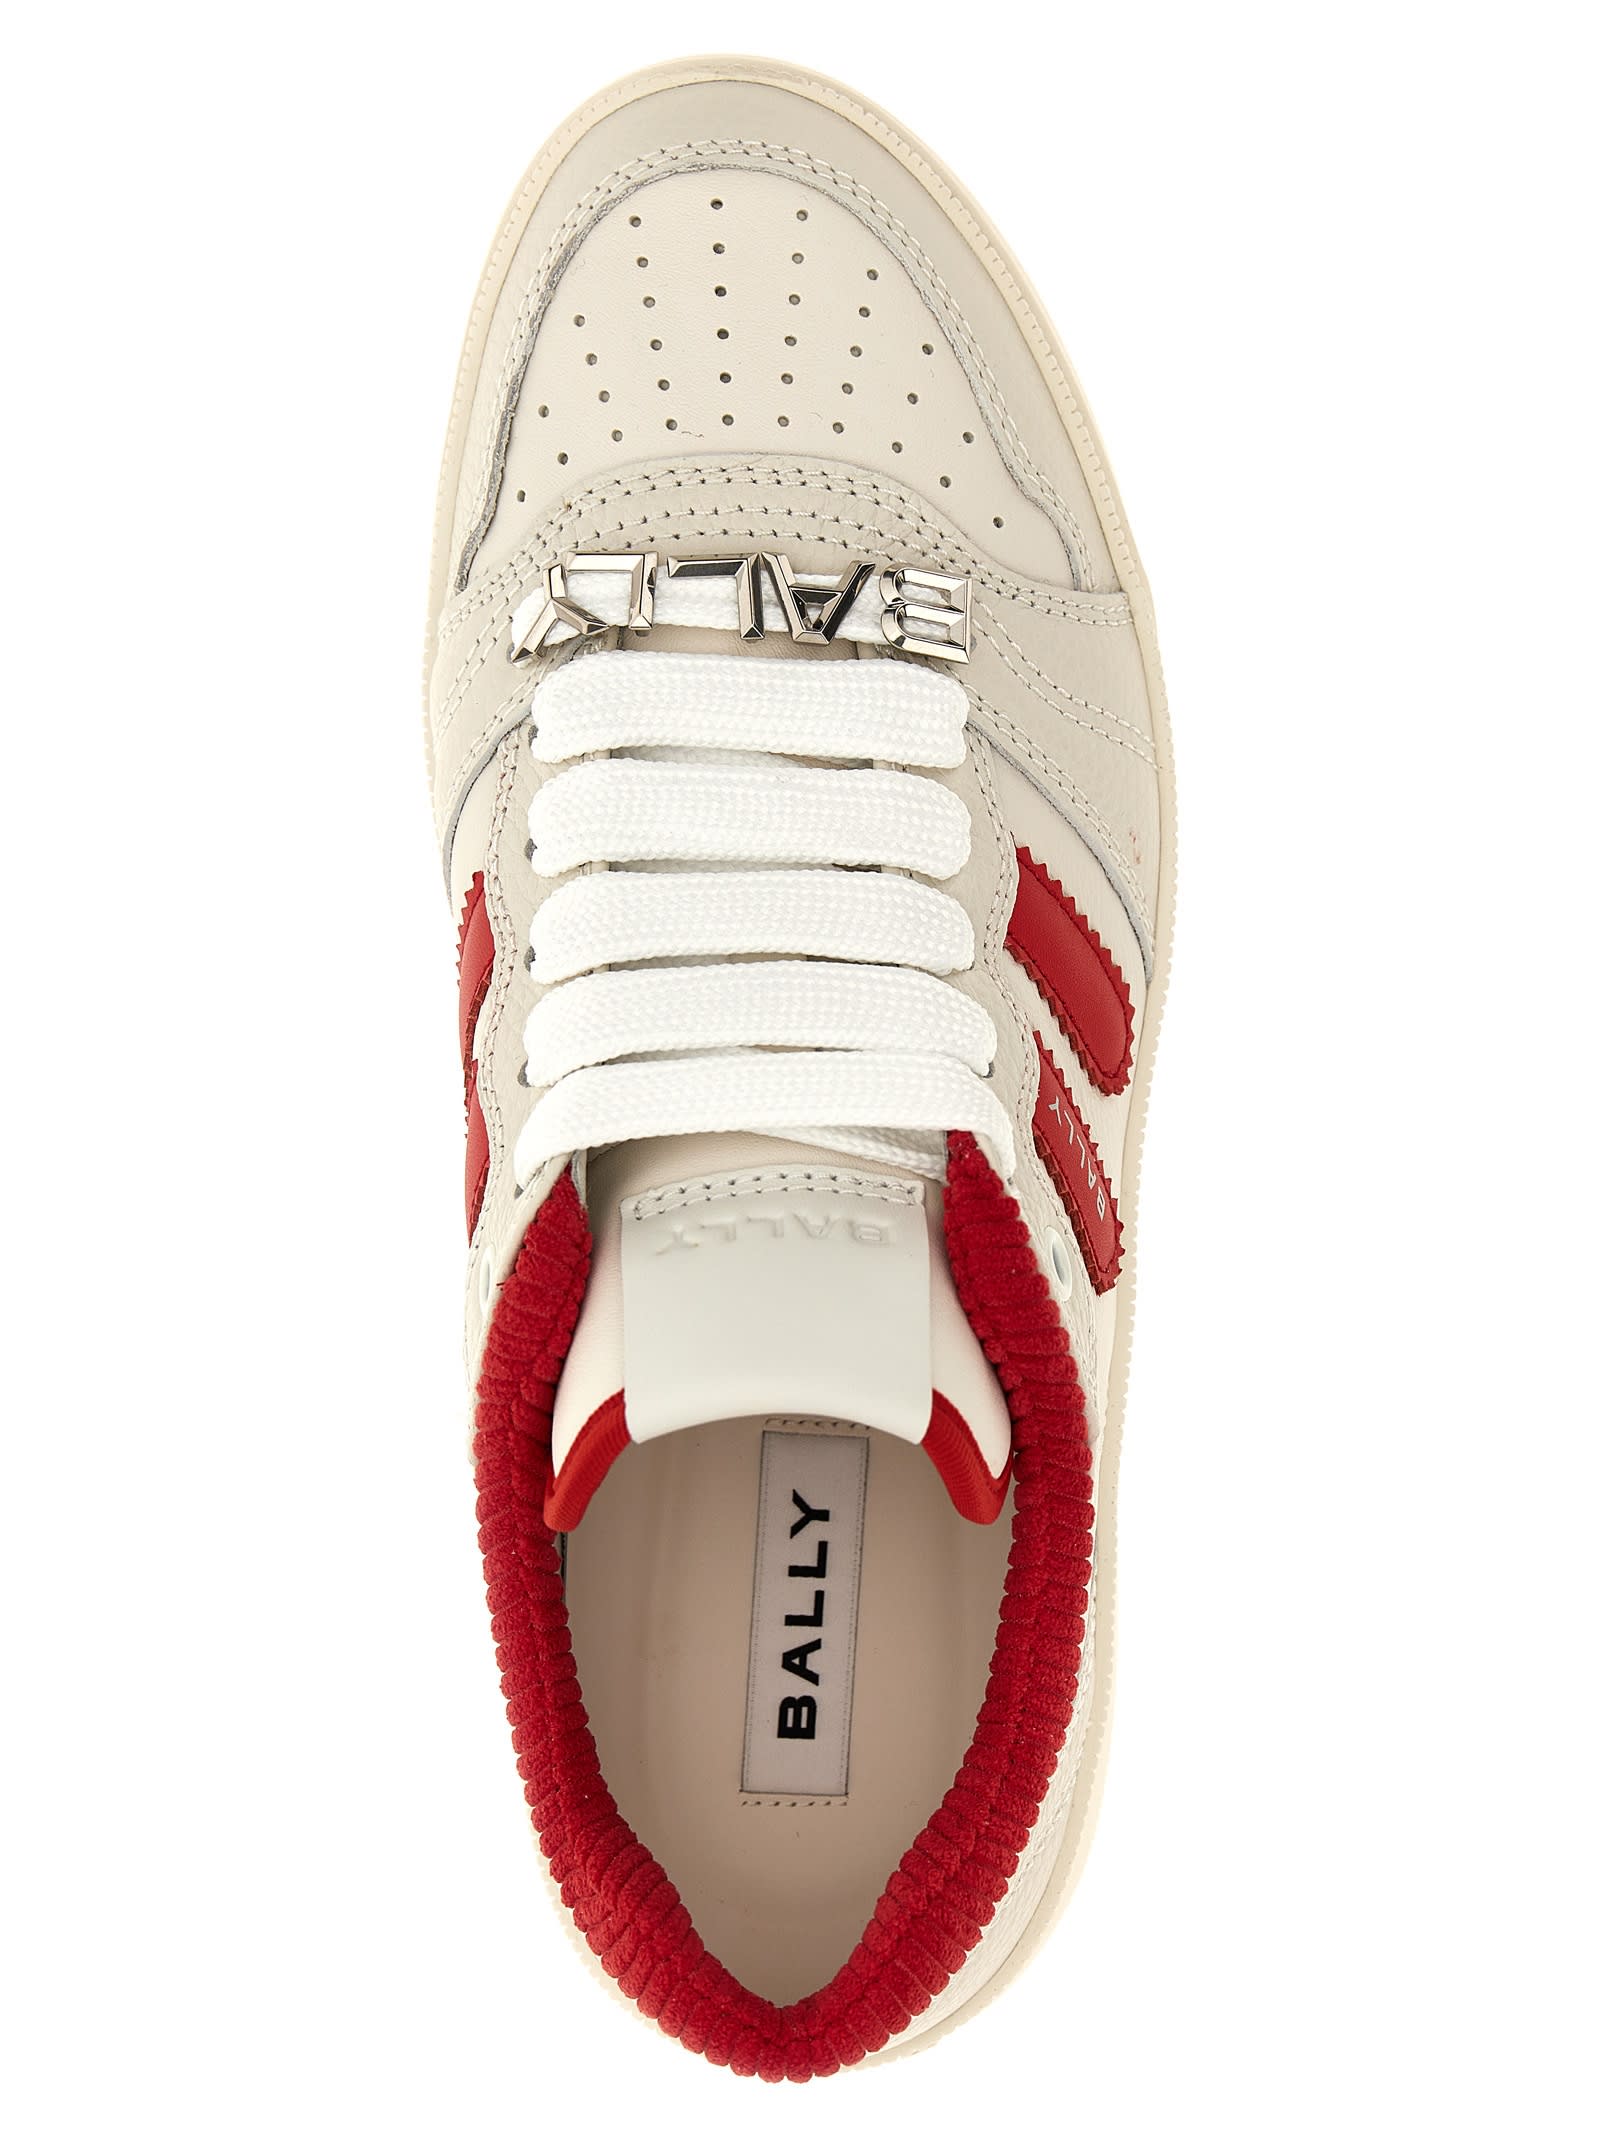 Shop Bally Royalty Sneakers In Red